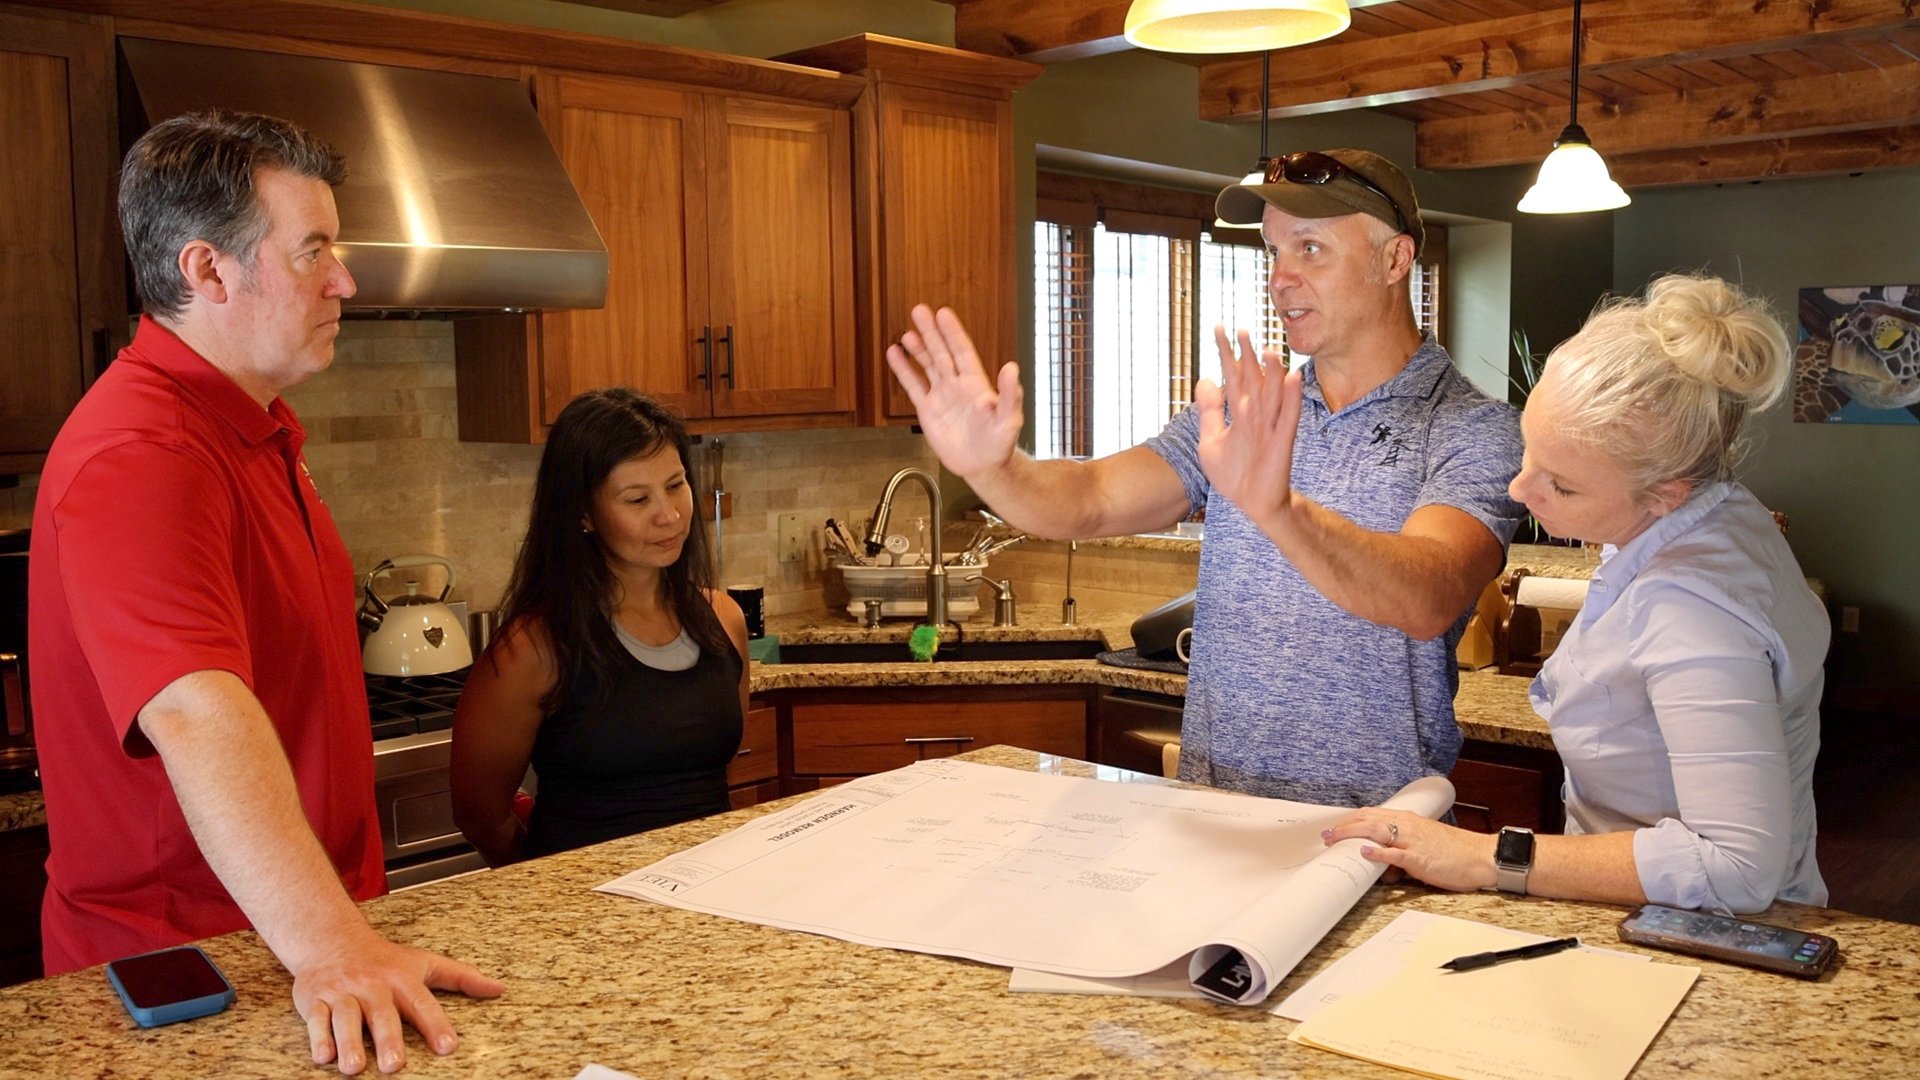 Ray, Ali, & clients discussing a kitchen remodel